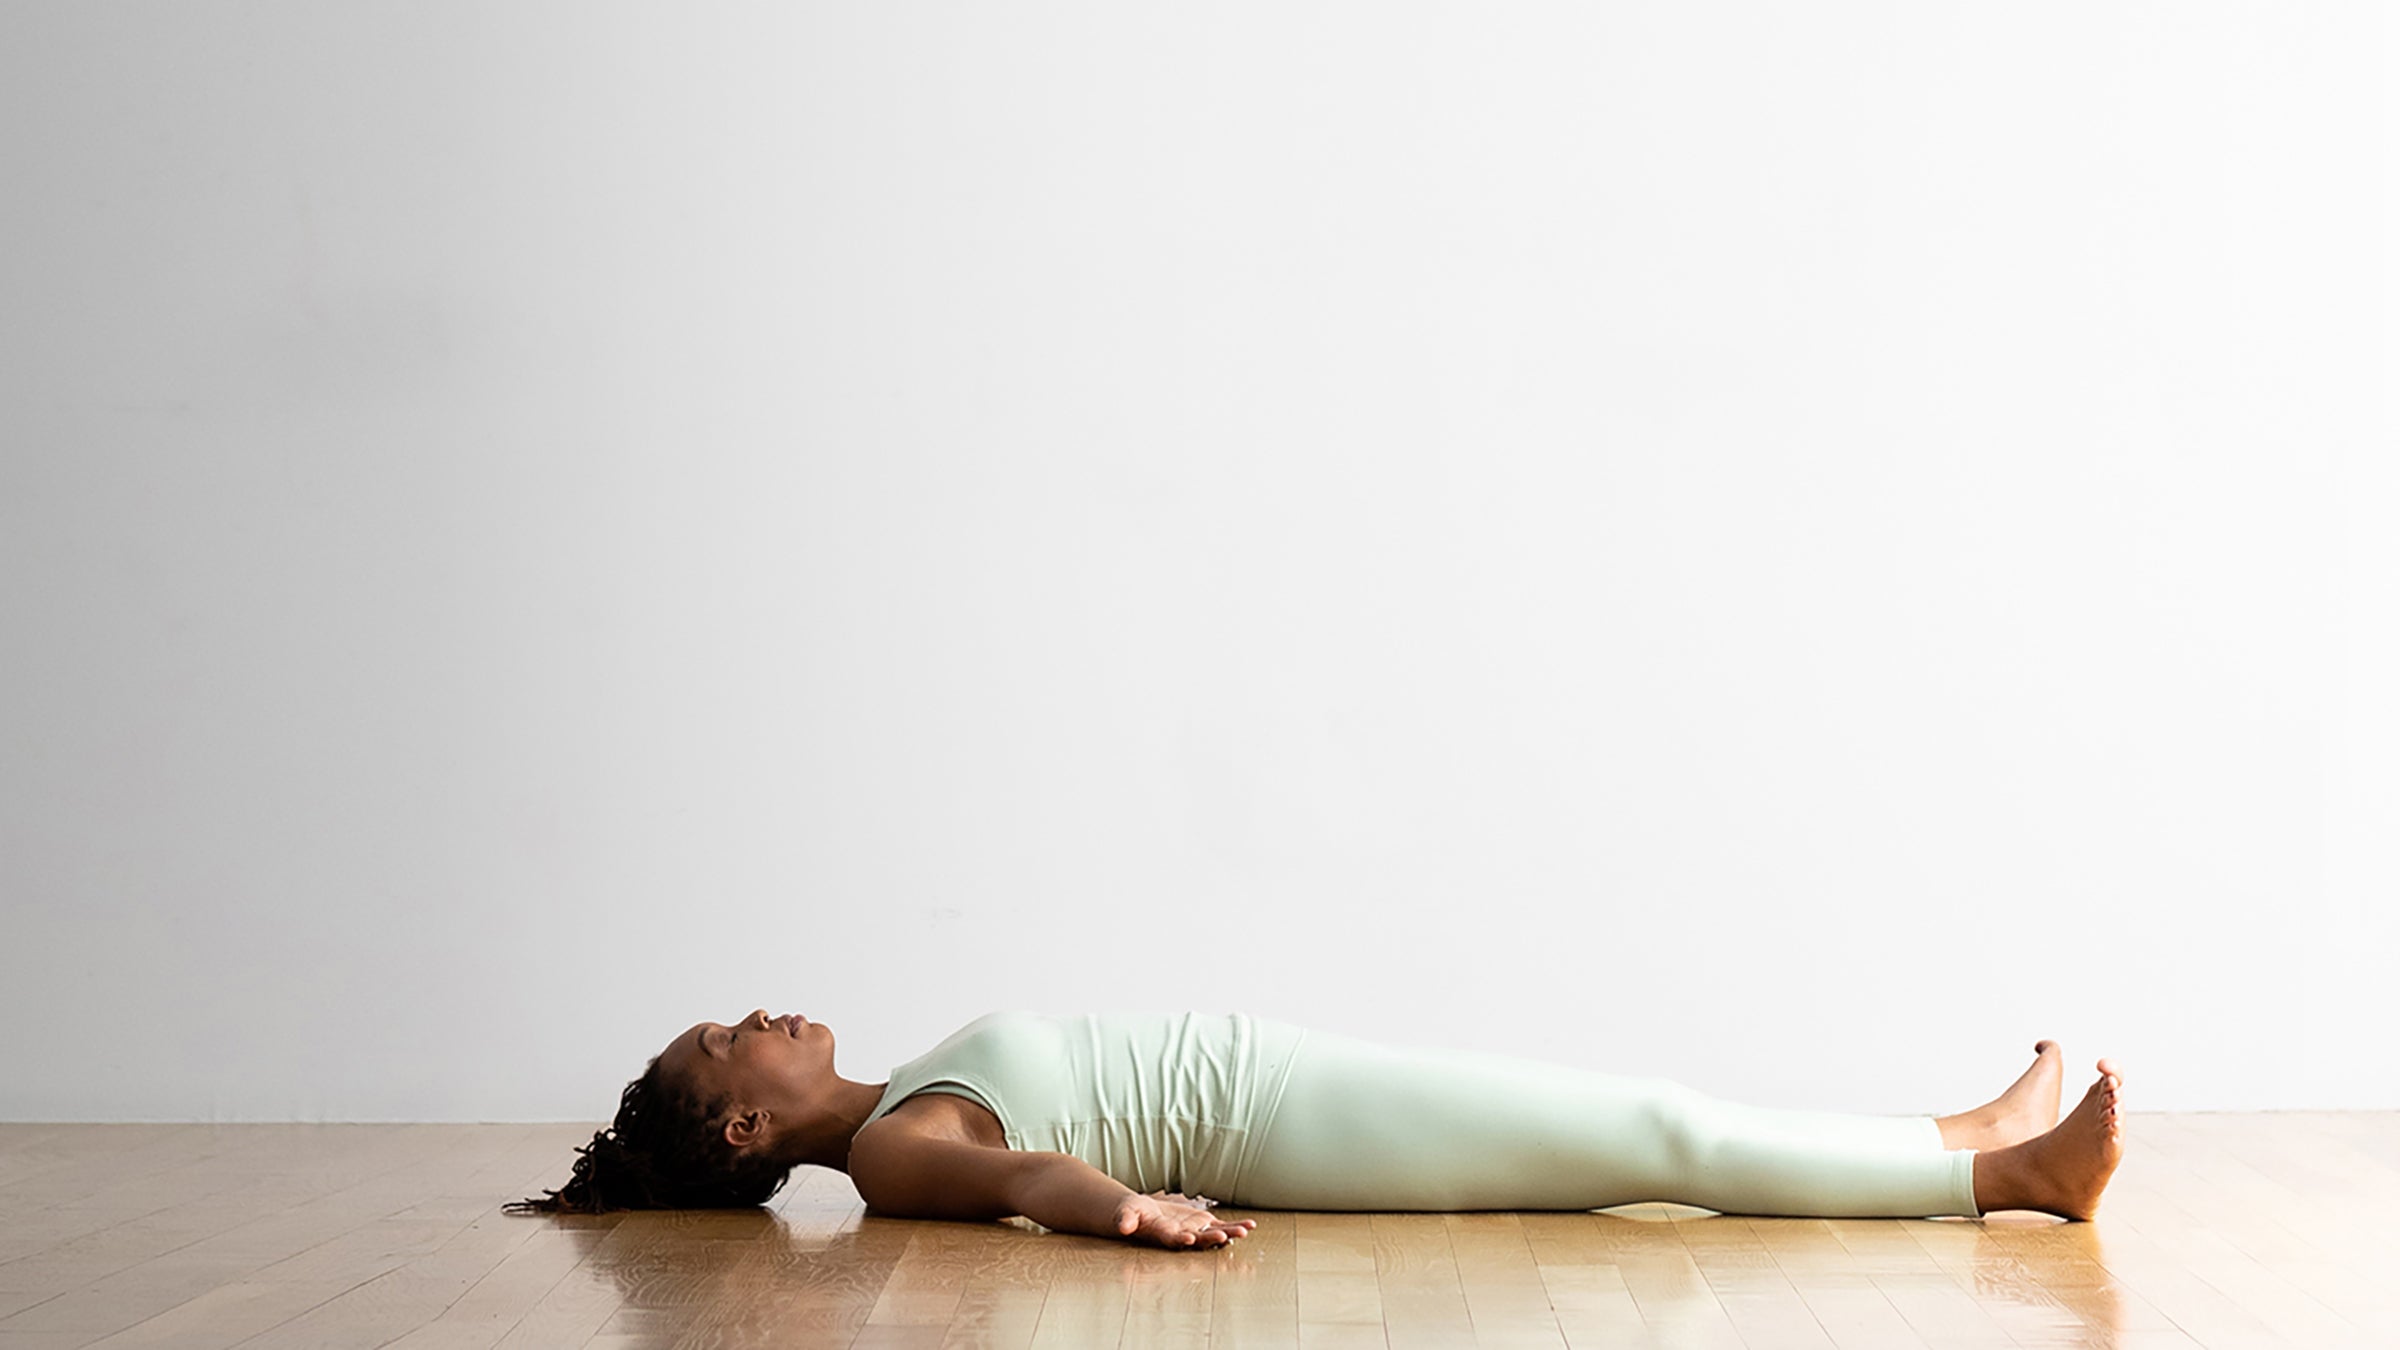 A Black woman in sea-green clothes person demonstrates Savasana (Corpse Pose) in yoga